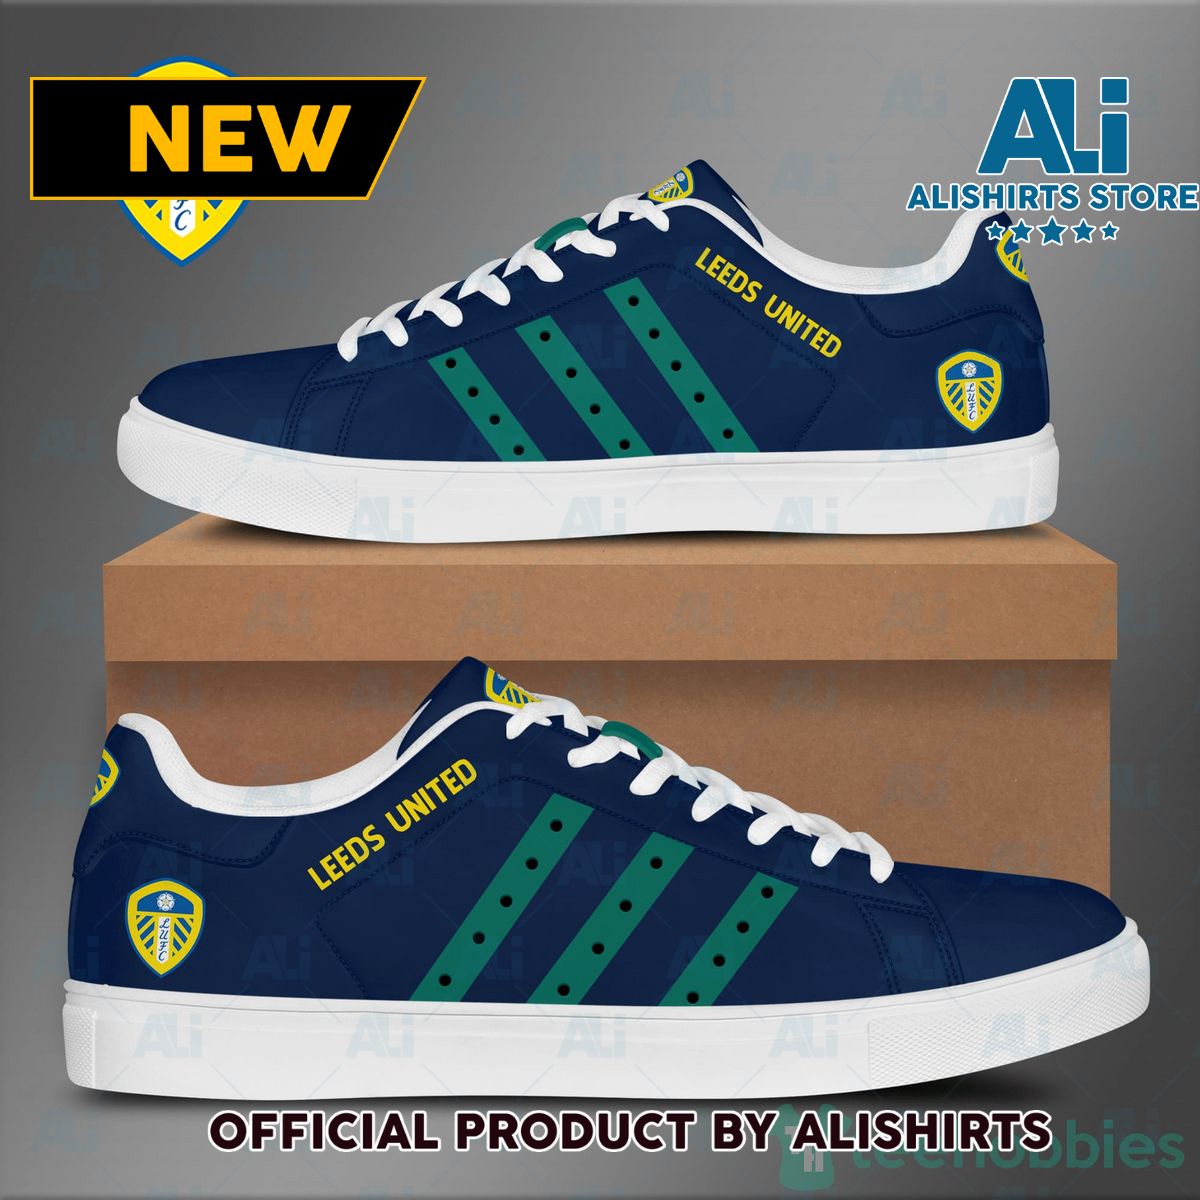 Leeds United Navy Adidas Stan Smith Low Top Skate Shoes